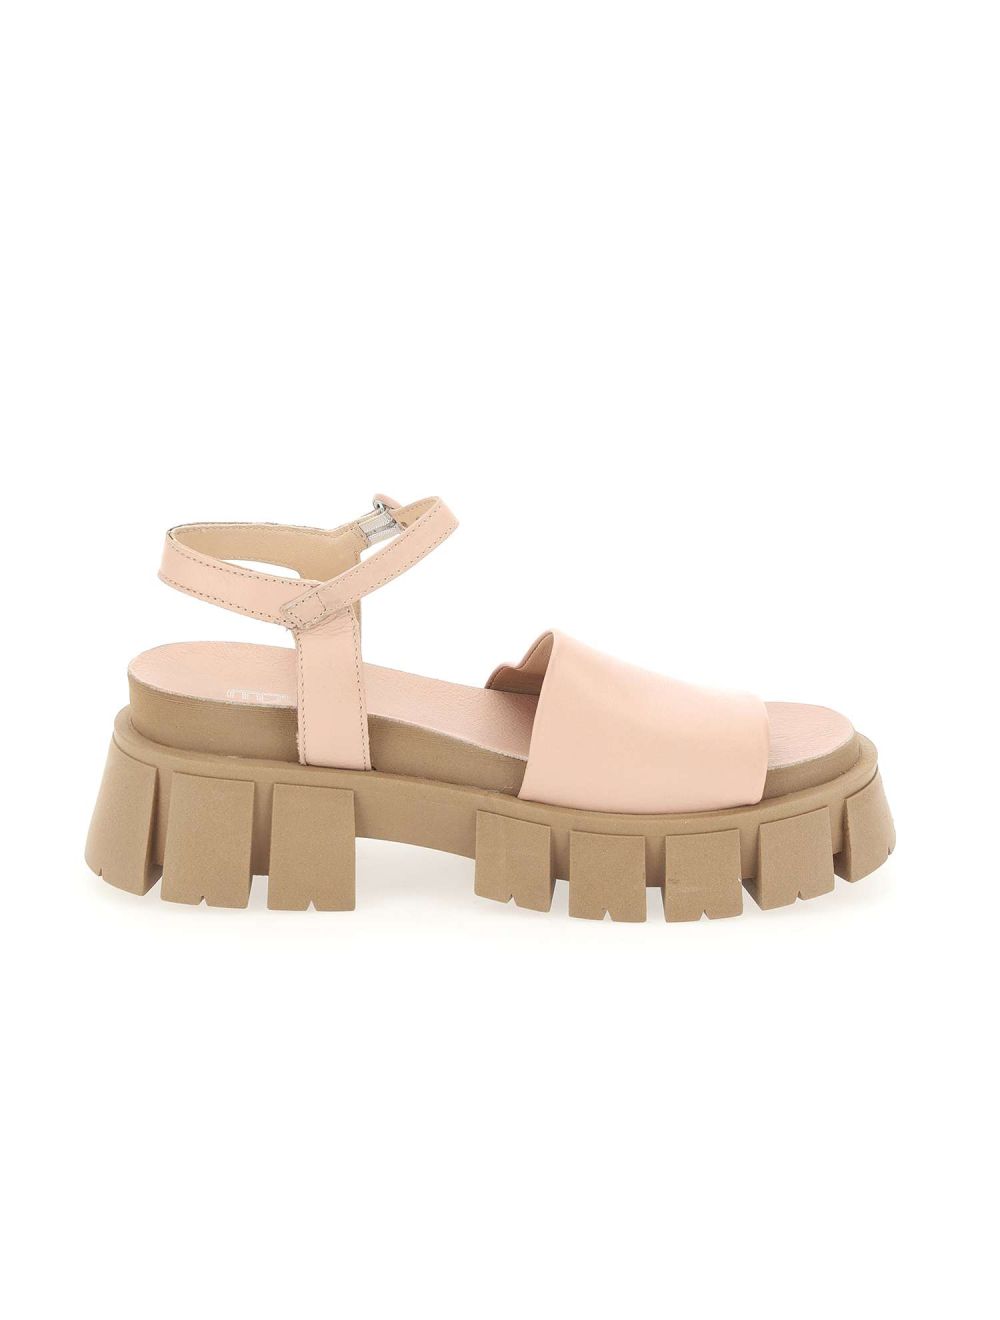 SANDALS ESAGERATA P57005 | Shoes, Ankle Boot and Sandals